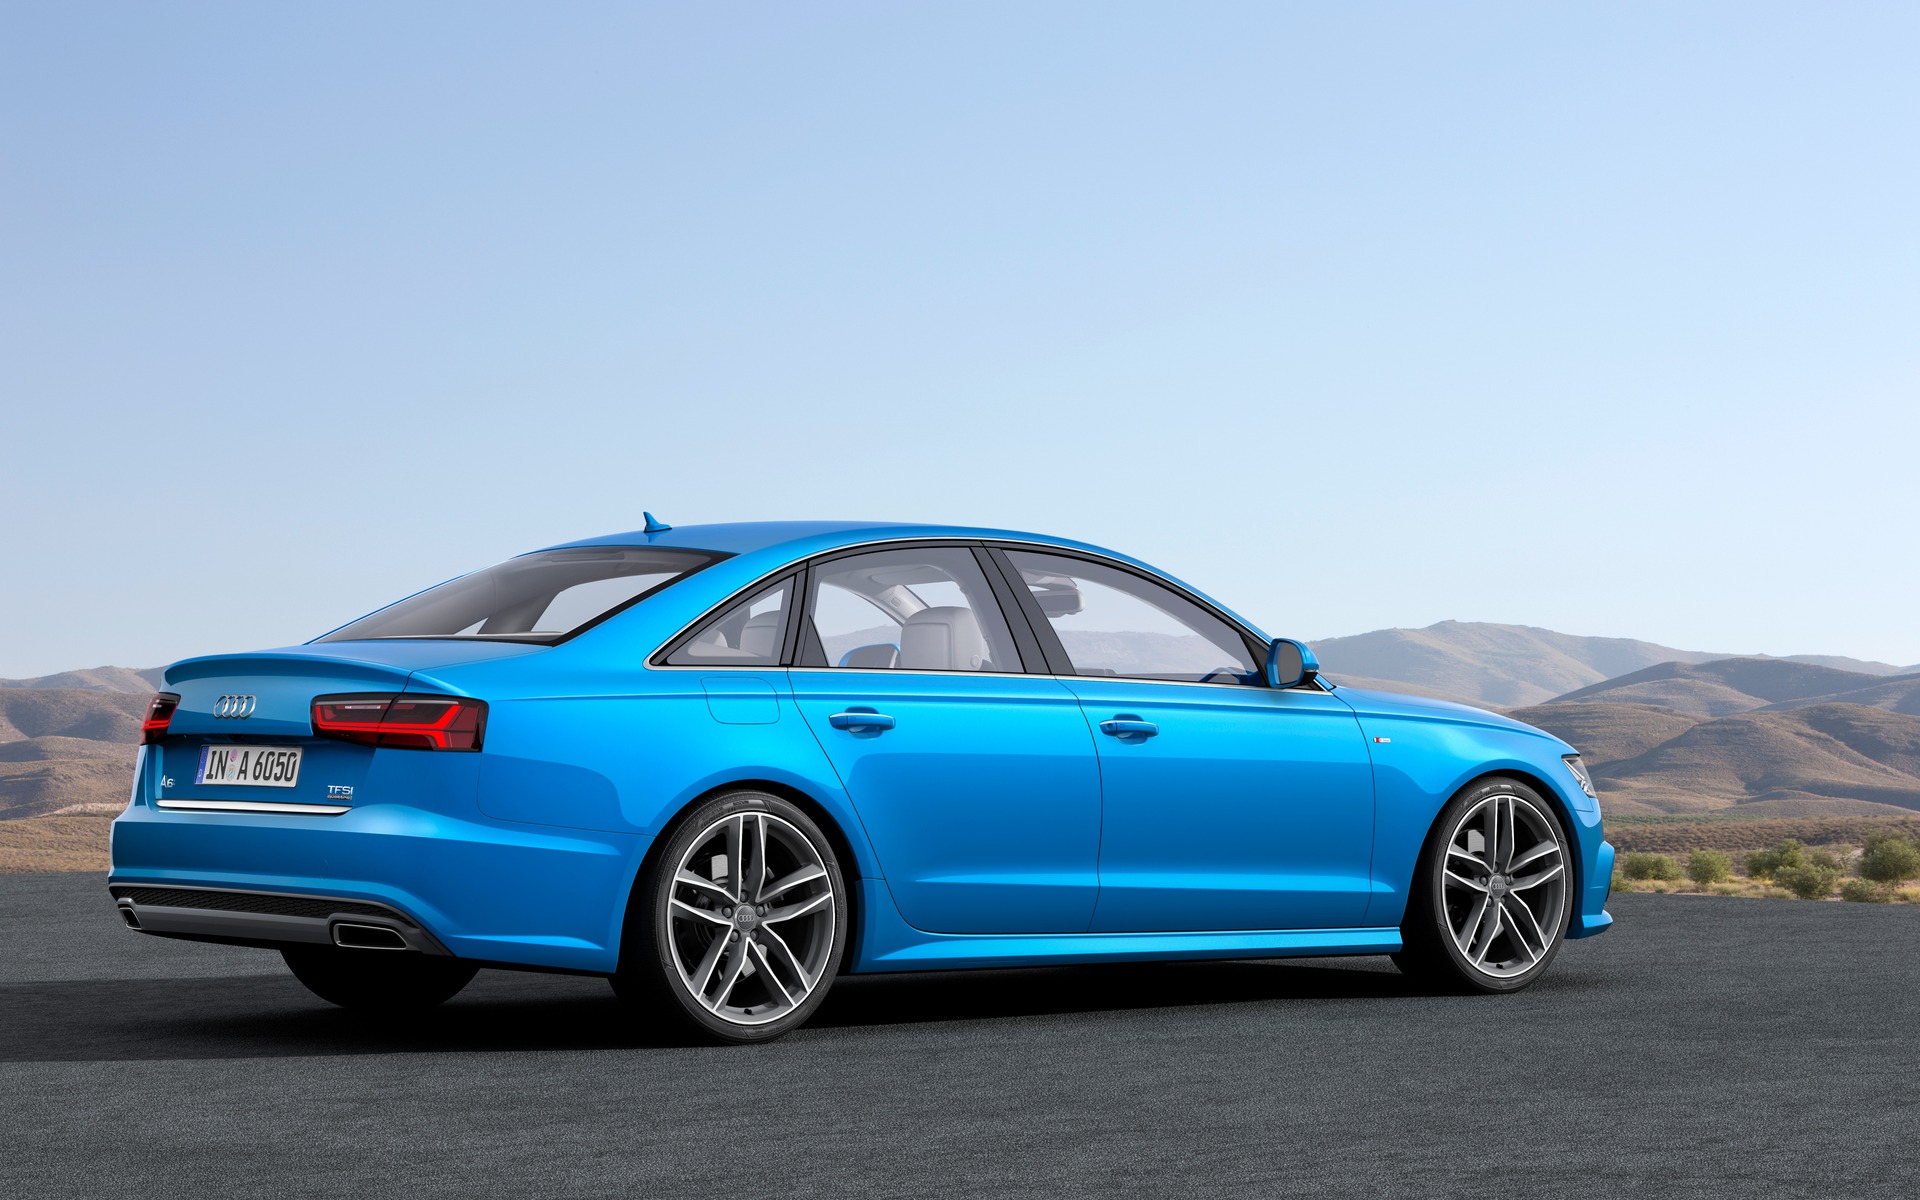 Despite its size, the A6 offers a balanced ride and serious braking.